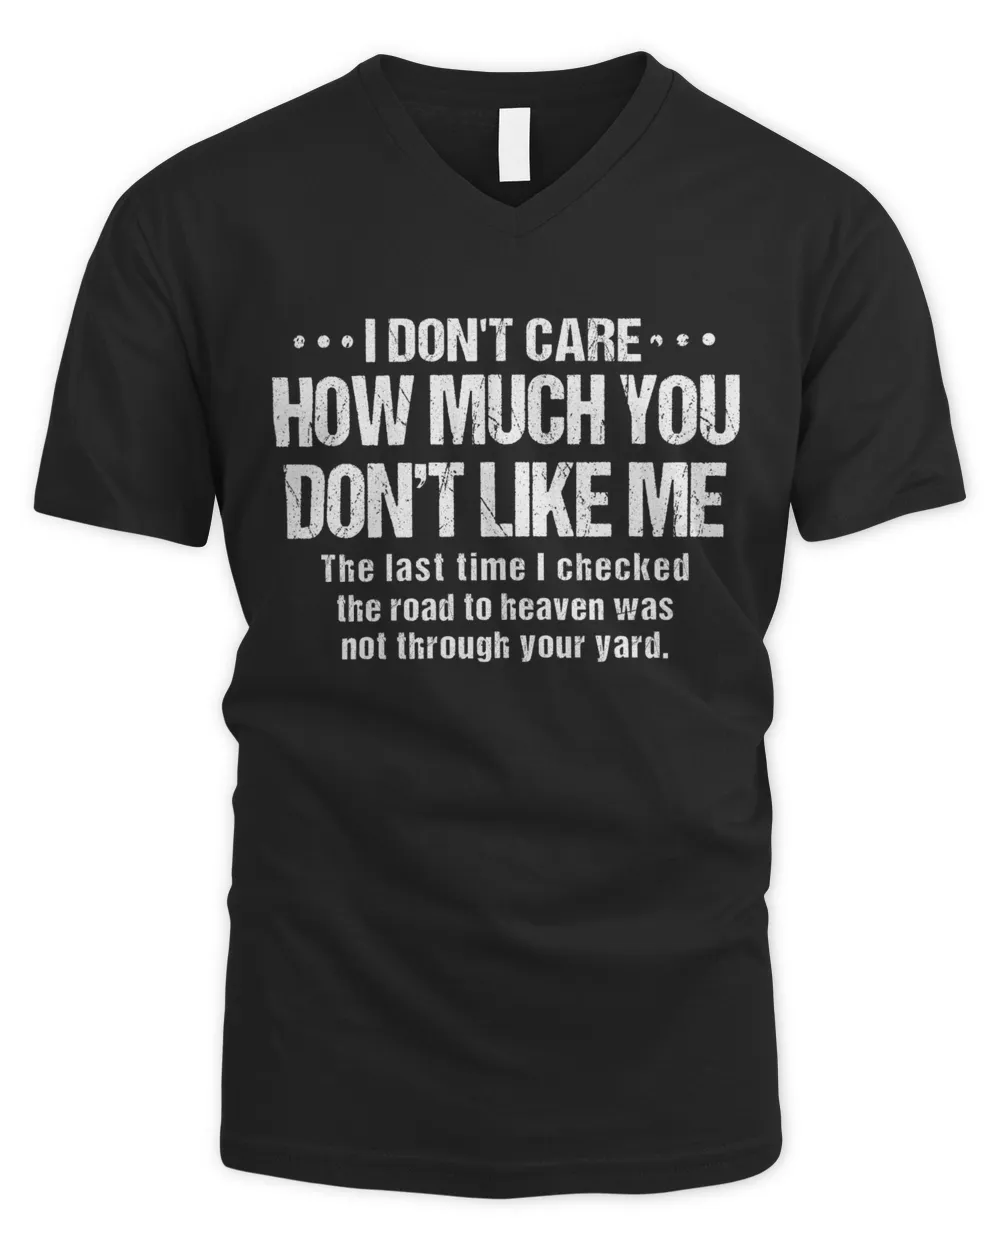 I DON'T CARE HOW MUCH YOU DON'T LIKE ME